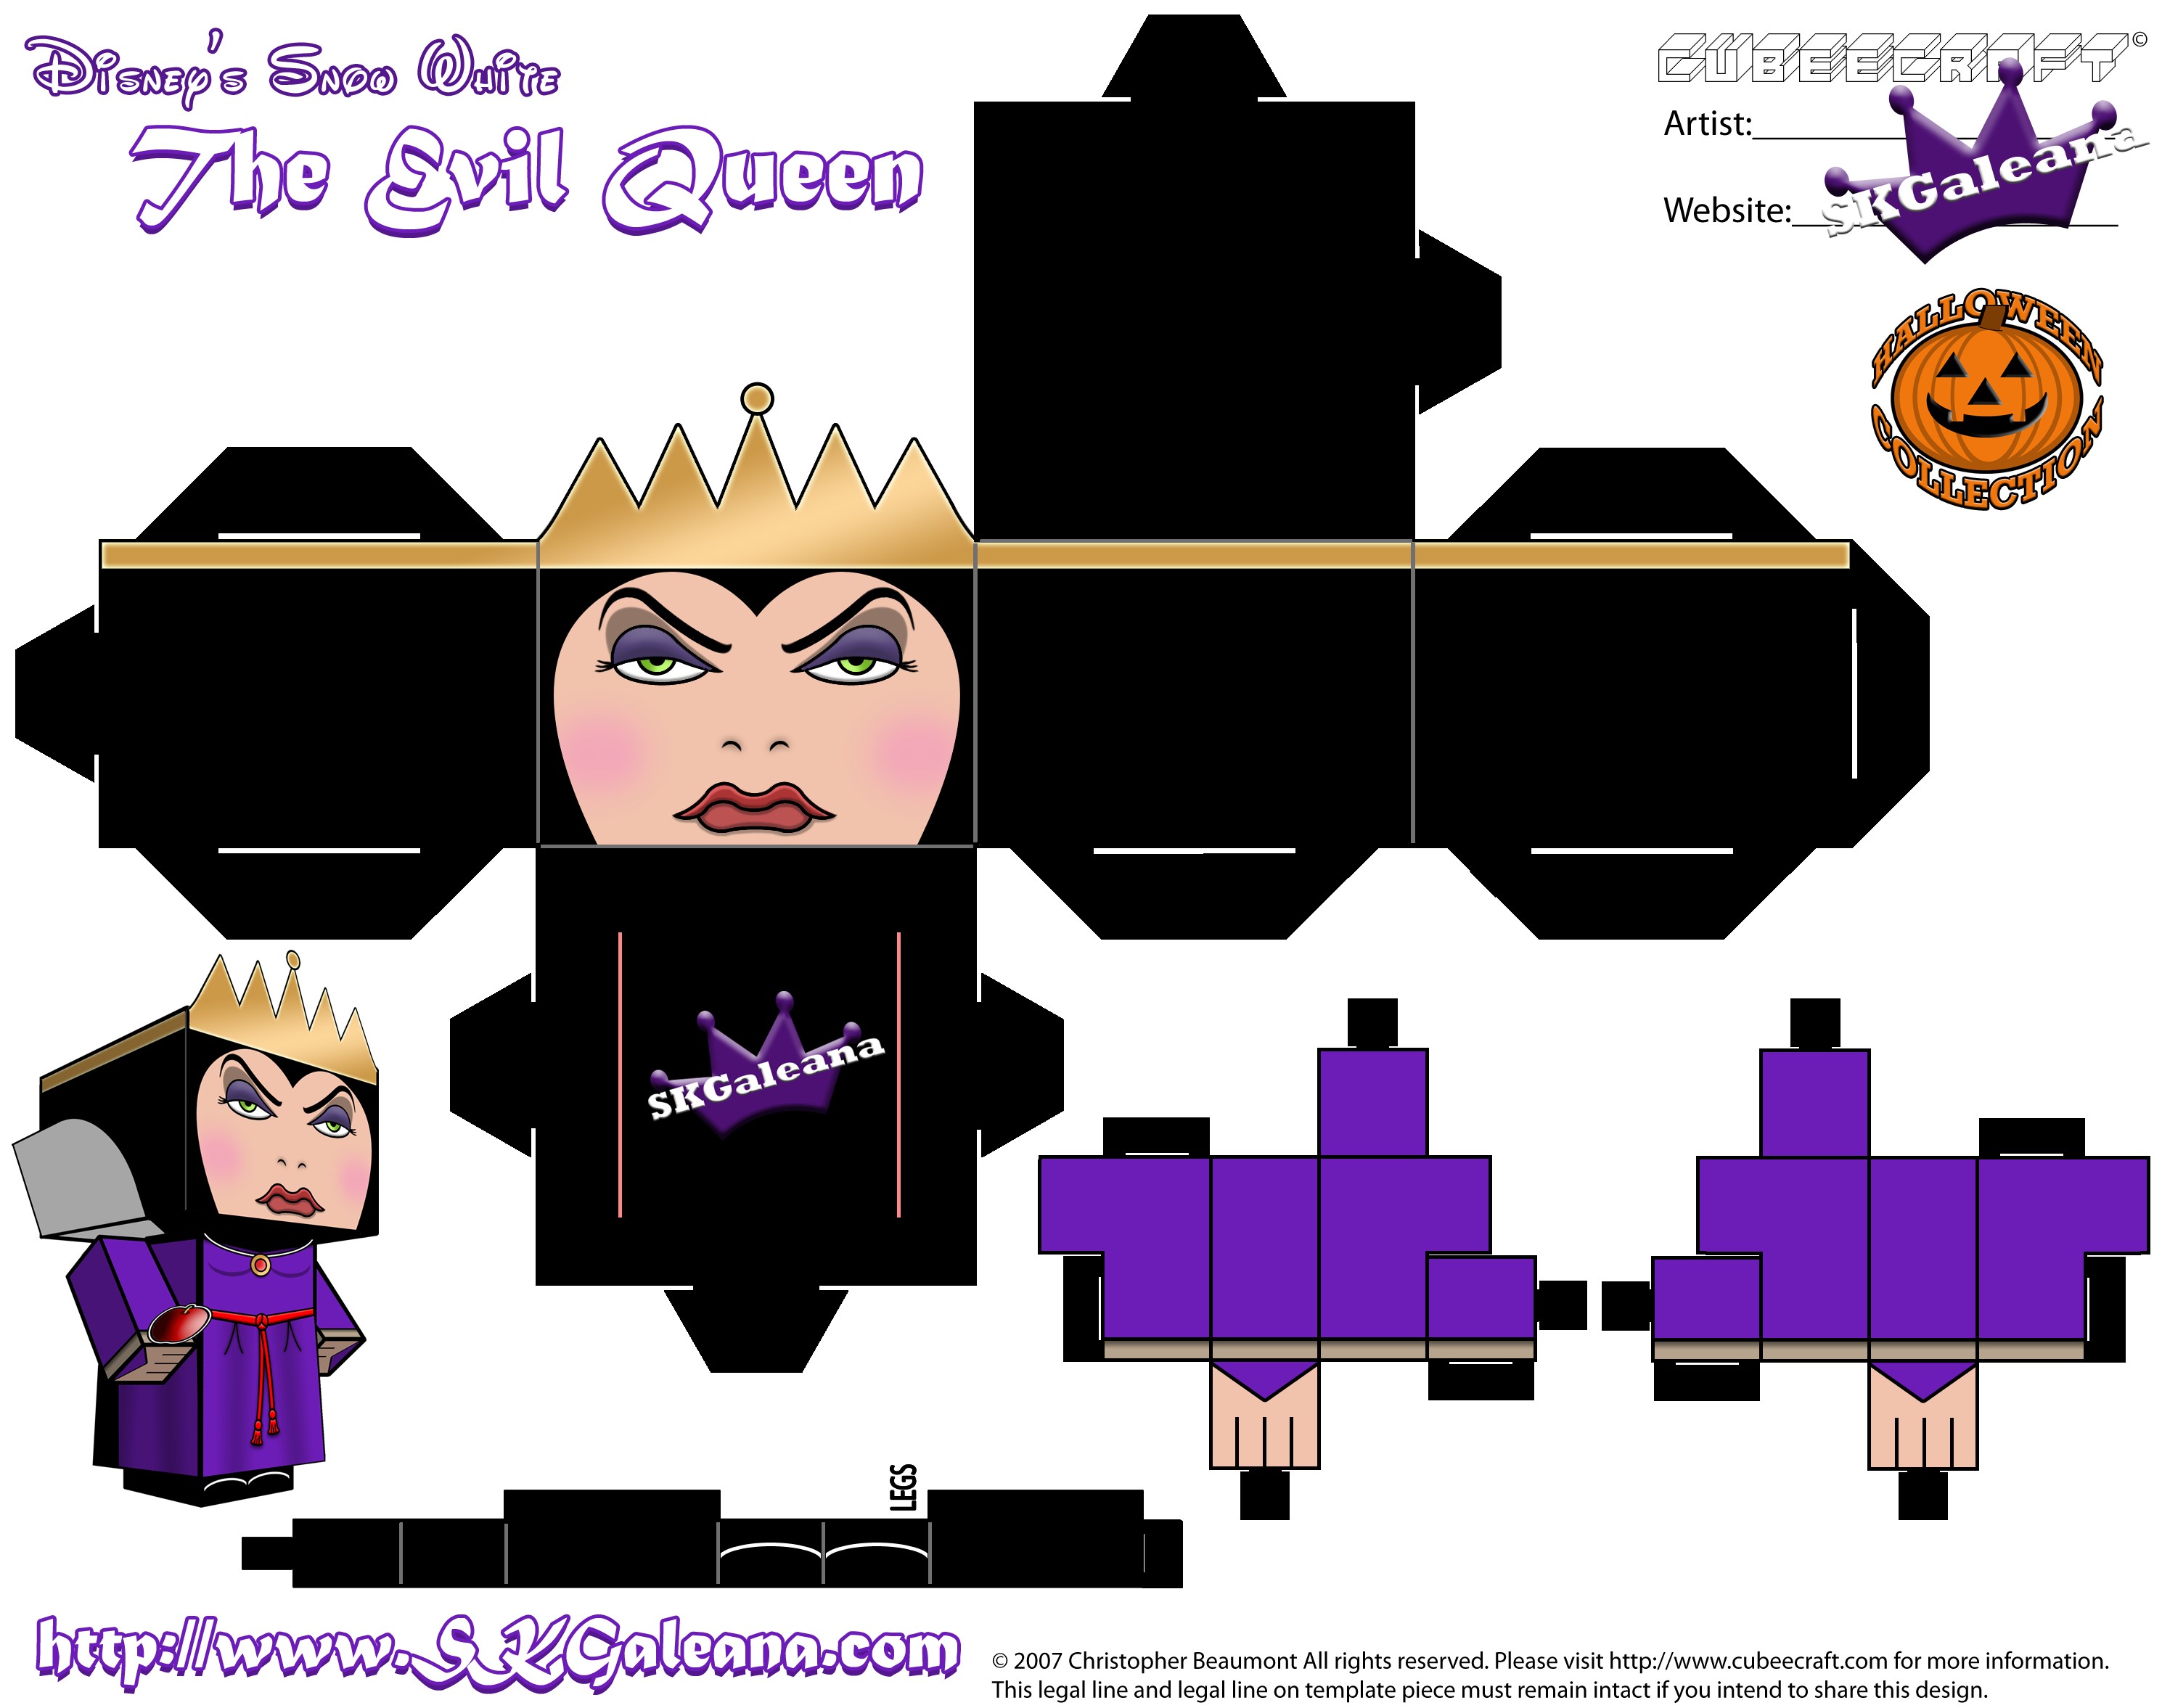 Disney 3d Papercraft Cubeecraft Of the Evil Queen From the Disney Movie Snow White